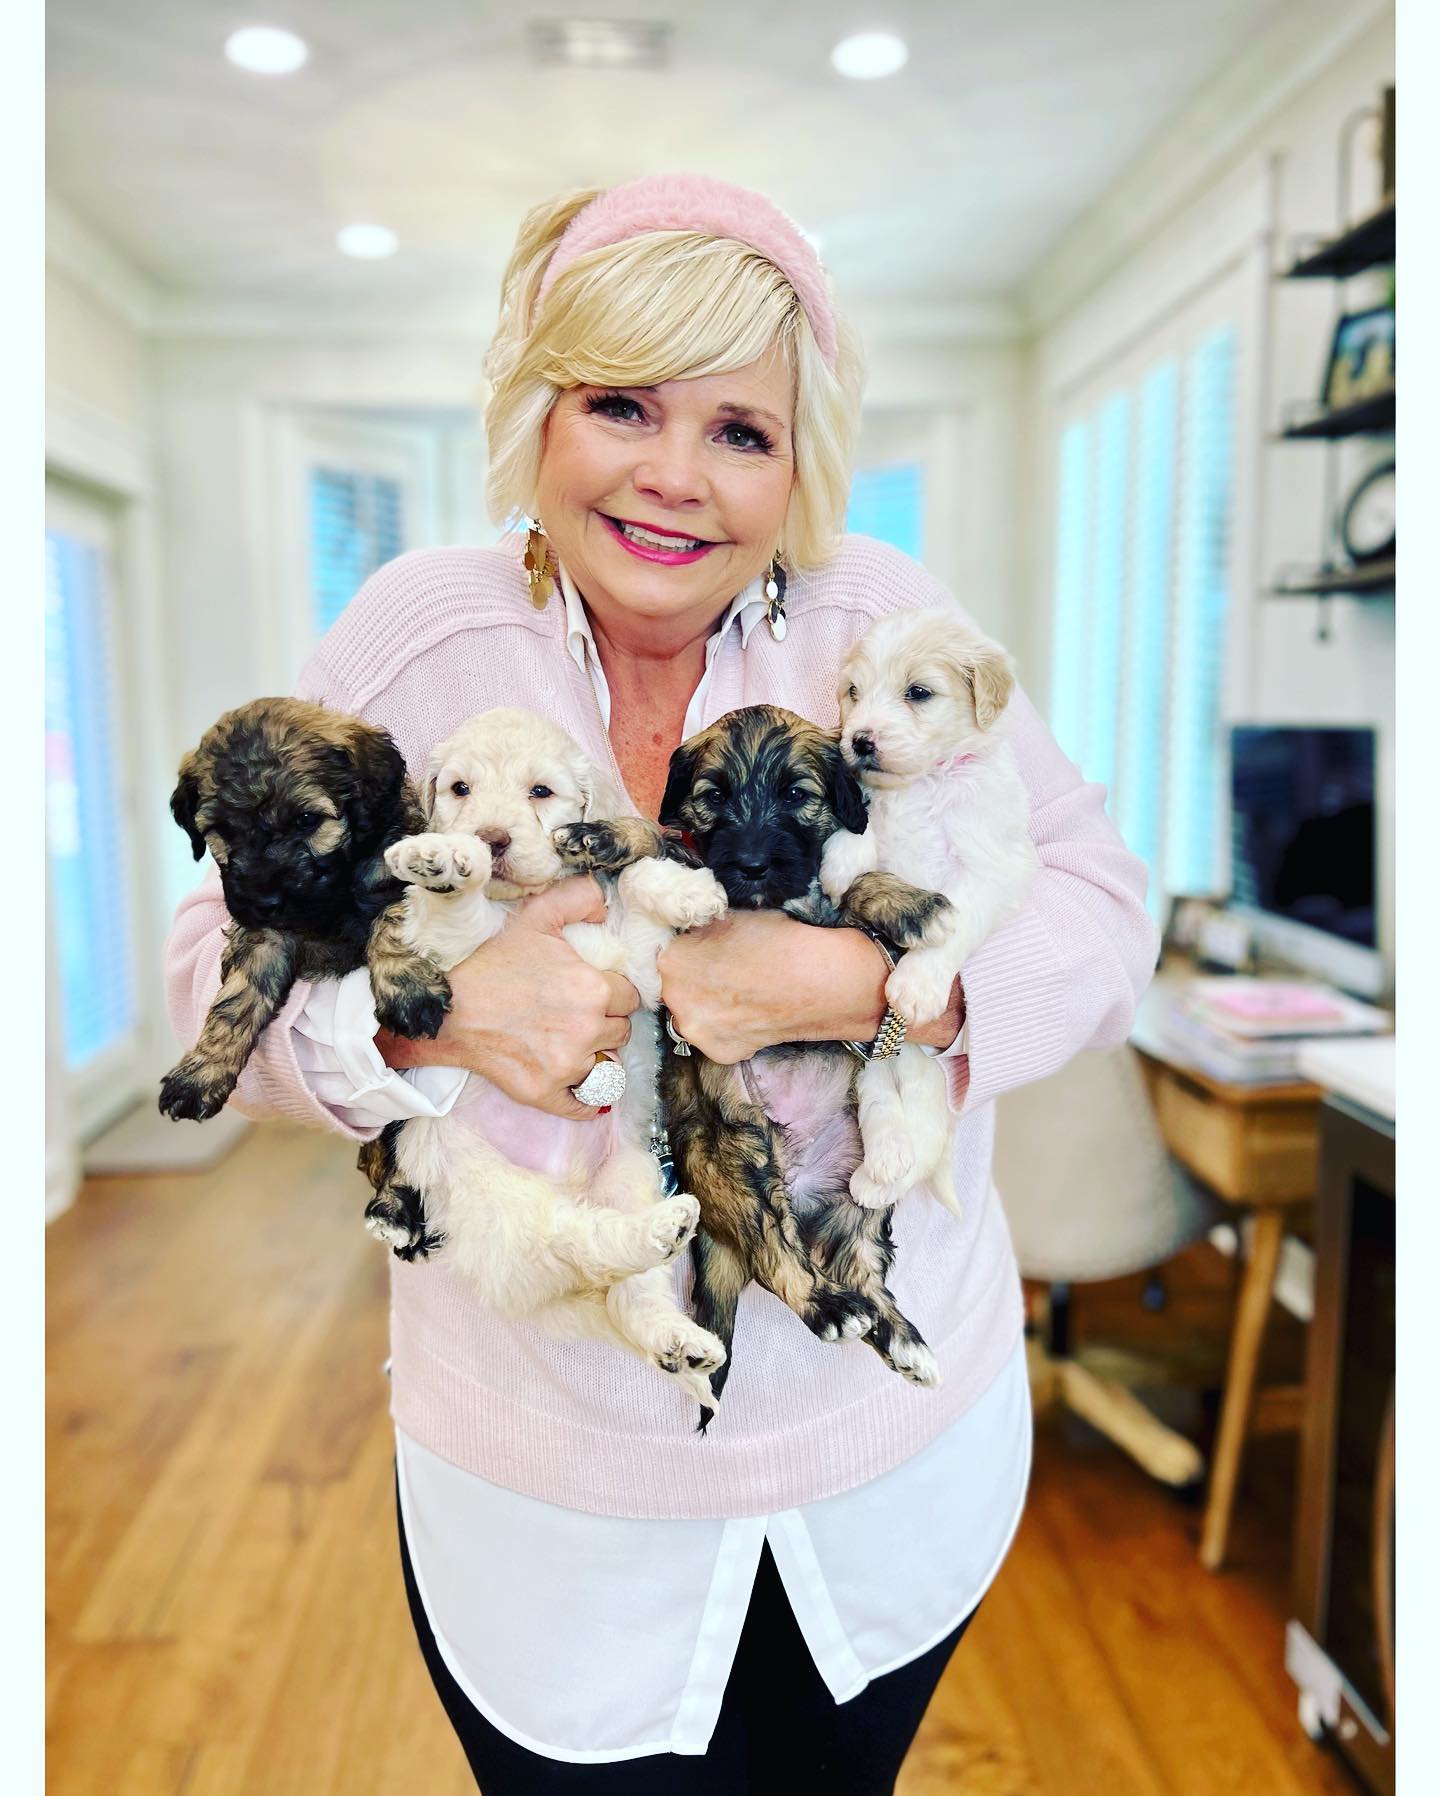 Sherri Smeraglia is holding all of her rare golden doodle-marked puppies. These puppies are so adorable, with their soft fur and sweet faces. It's easy to see why Sherri is so proud of them!